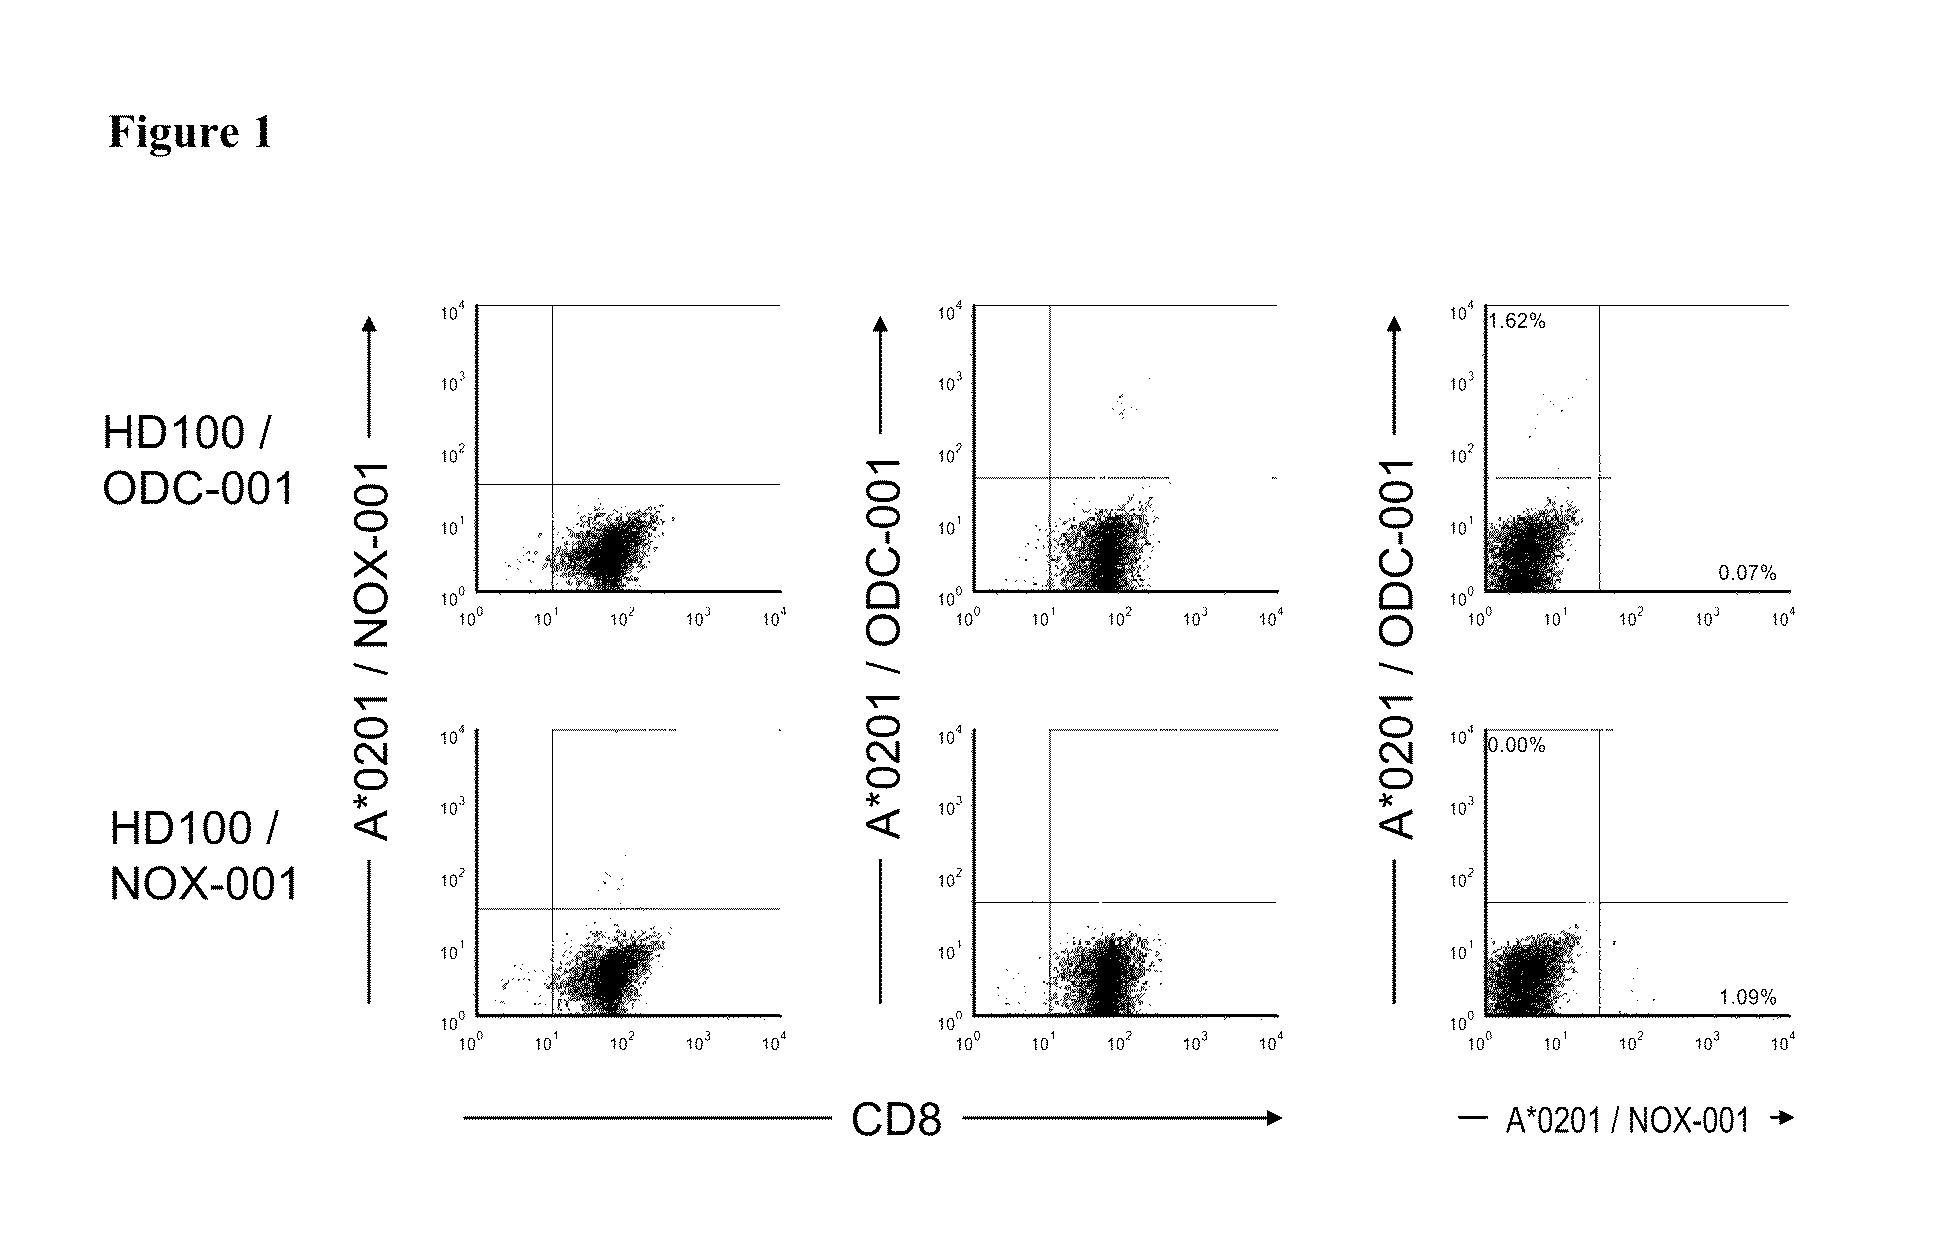 Composition of tumour-associated peptides and related anti-cancer vaccine